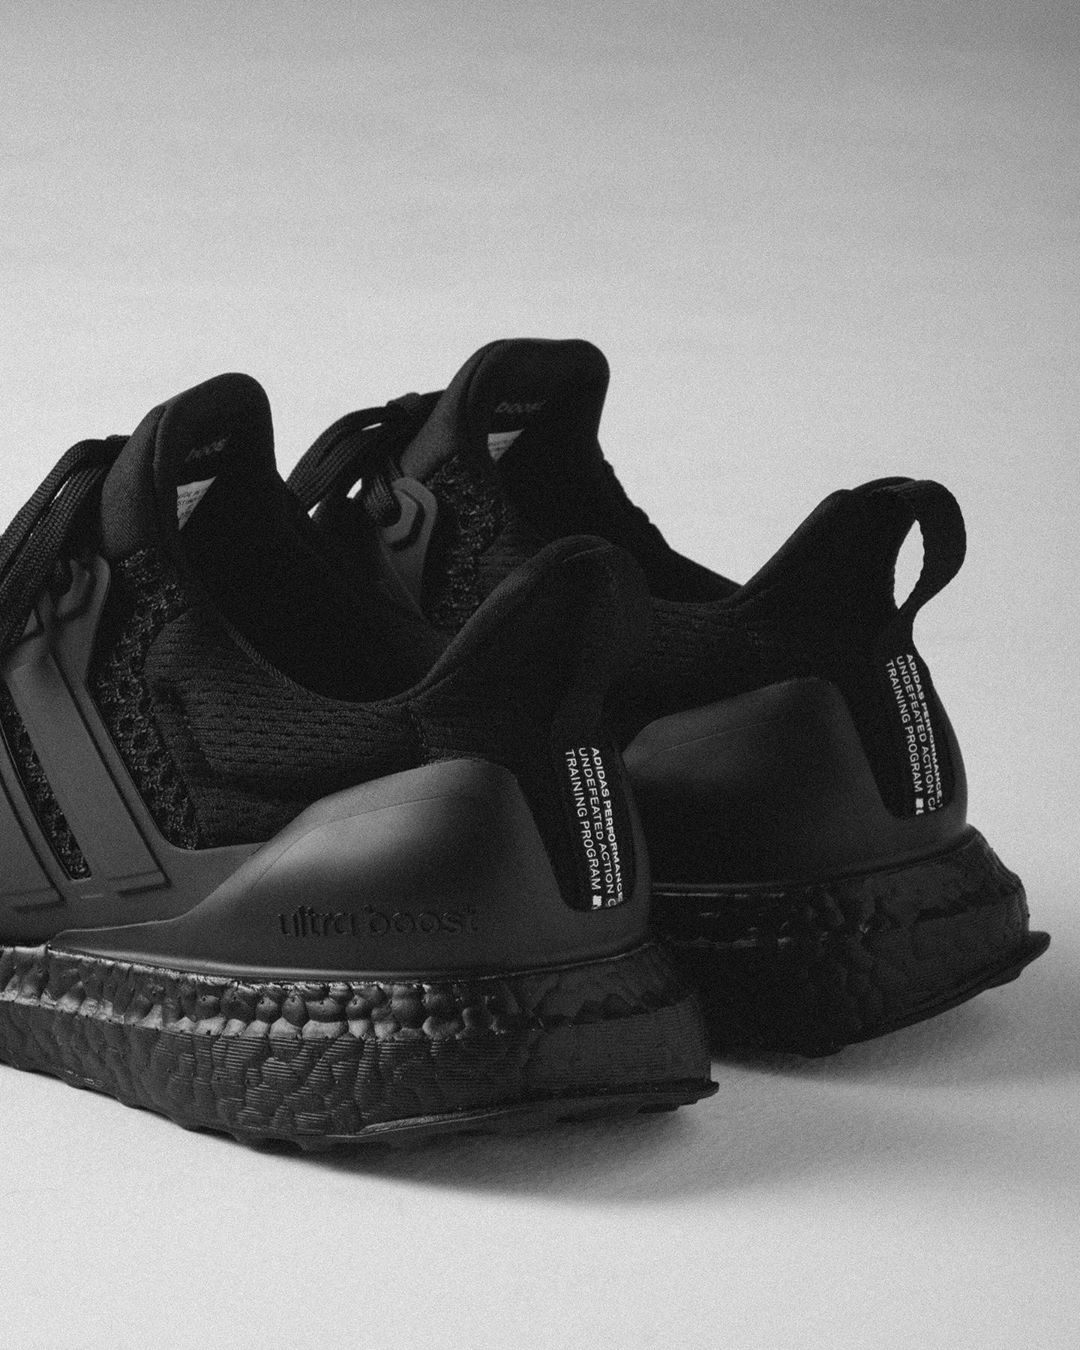 UNDEFEATED × adidas ULTRA BOOST